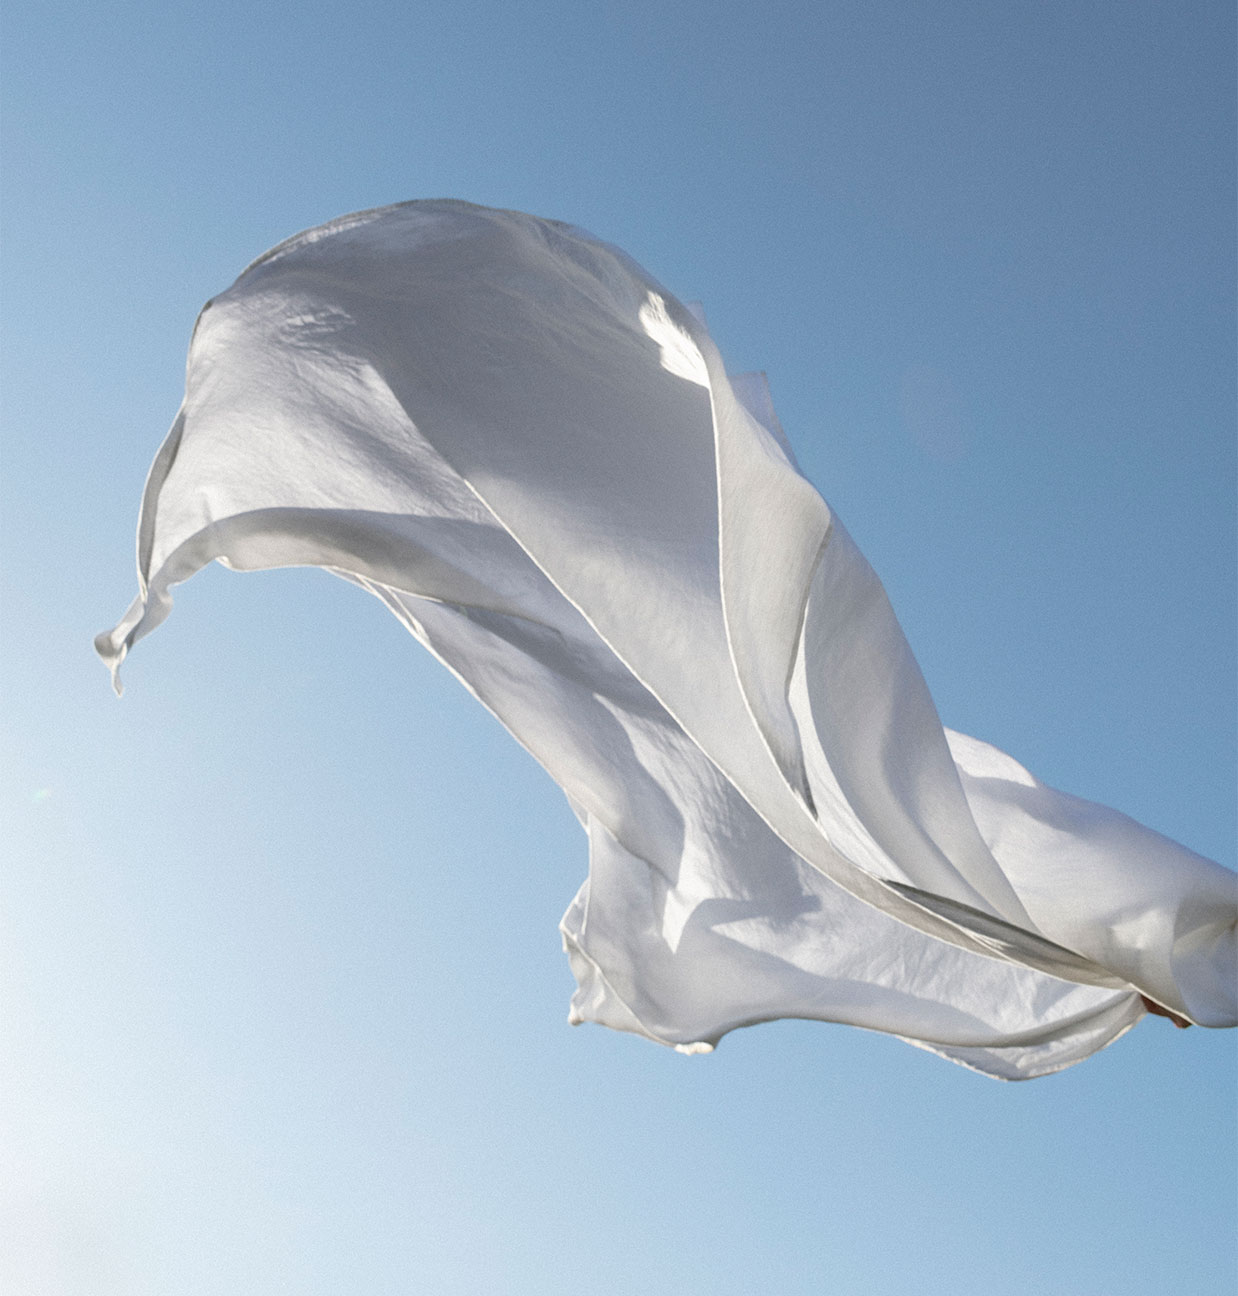 A white sheet blows in the wind against the backdrop of a clear blue sky. 